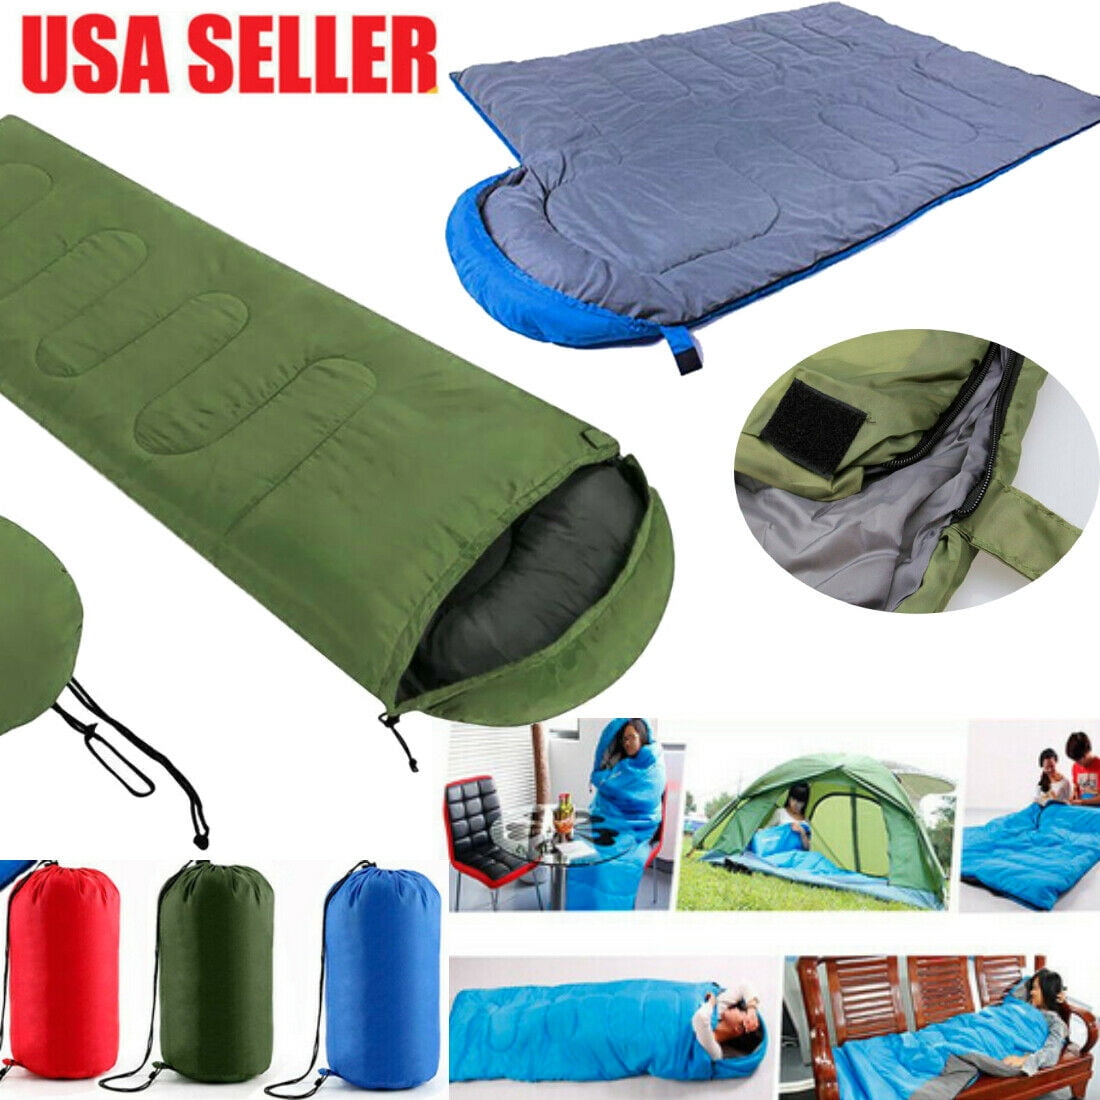 Details about   1Pcs Outdoor Camping Sleeping Bag Winter Fall Hiking Travel Warm Mummy Down Bags